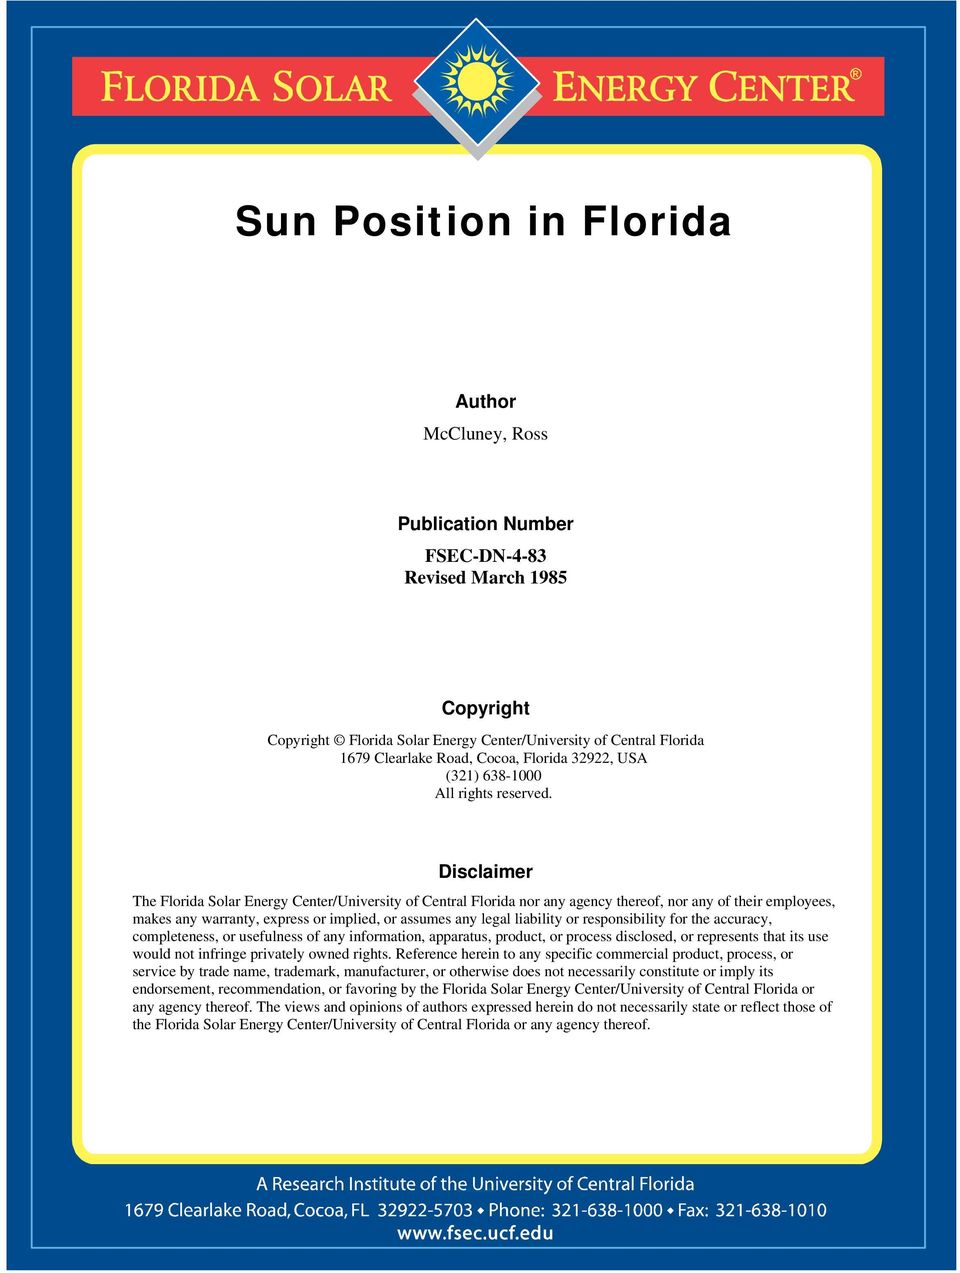 Disclaimer The Florida Solar Energy Center/University of Central Florida nor any agency thereof, nor any of their employees, makes any warranty, express or implied, or assumes any legal liability or